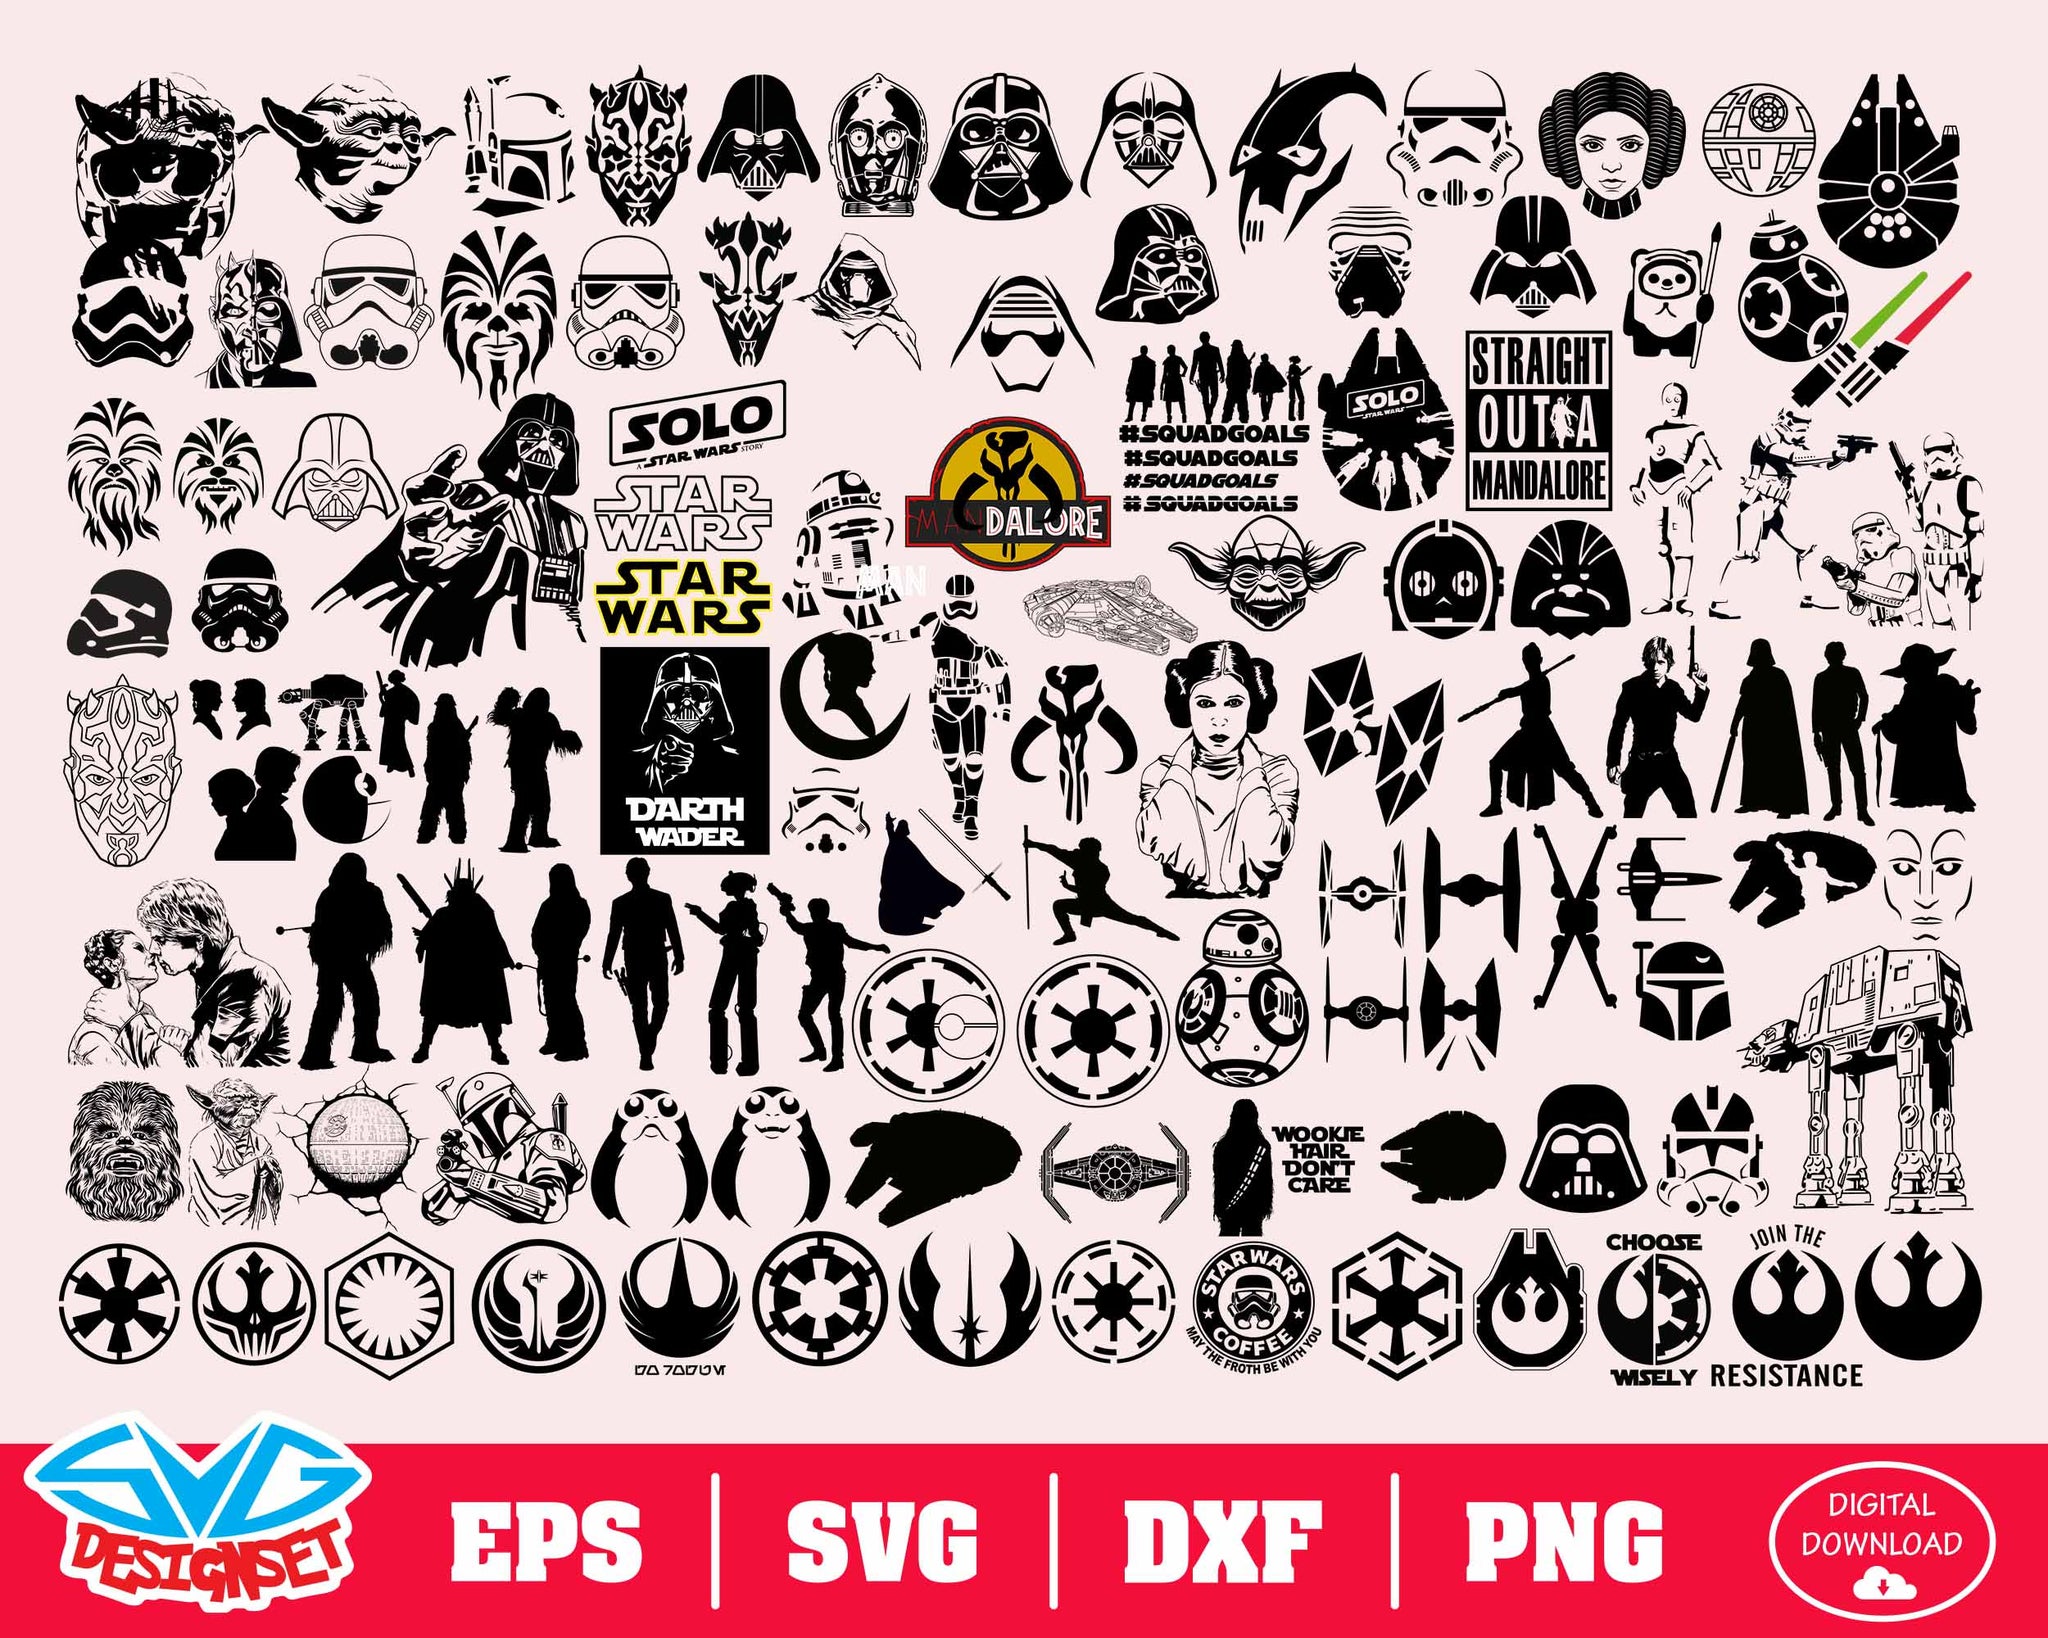 Starwar Svg, Dxf, Eps, Png, Clipart, Silhouette and Cutfiles - SVGDesignSets